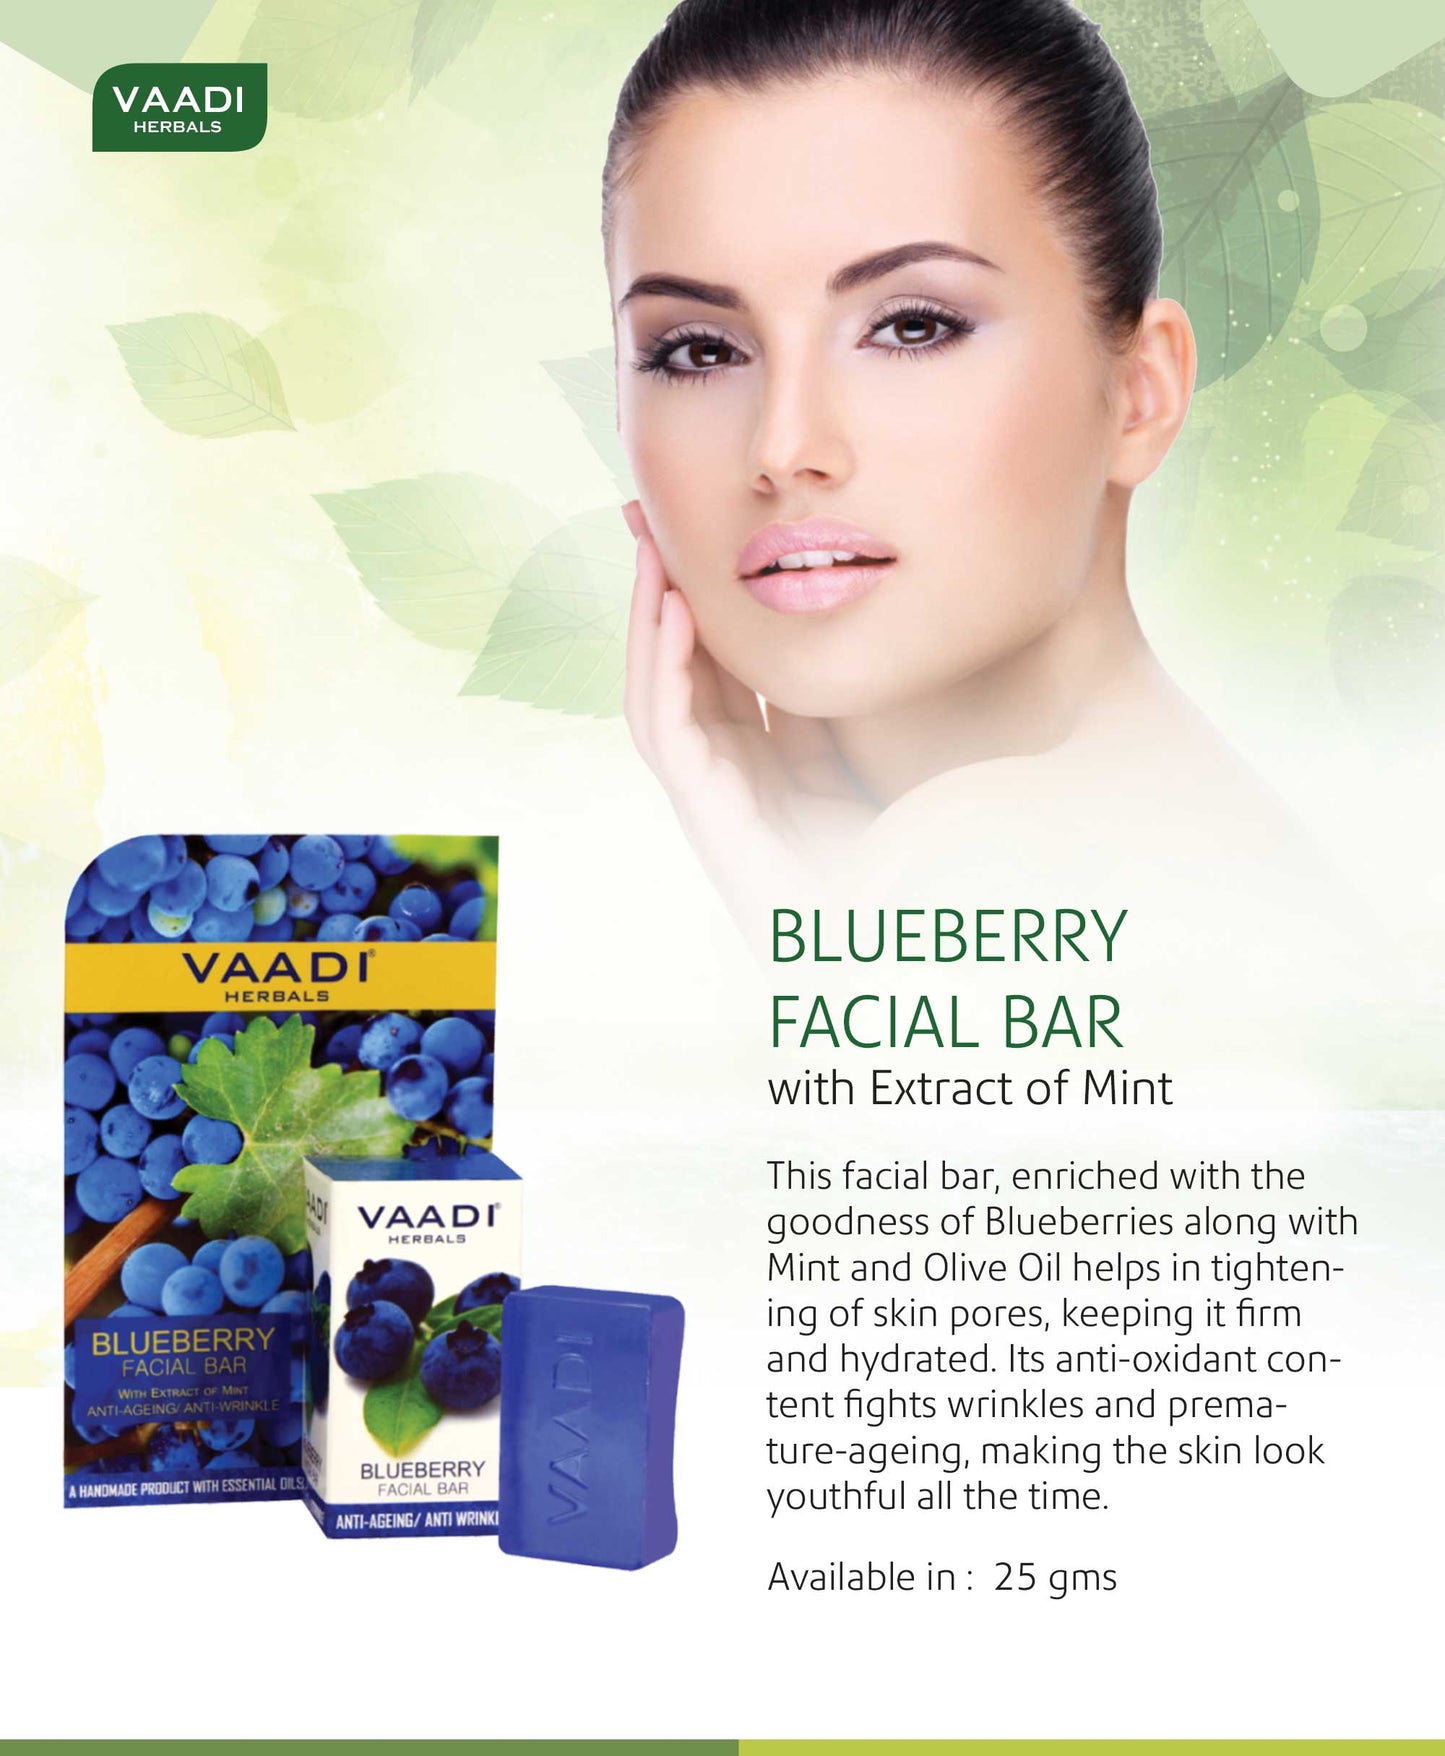 Organic Blueberry Facial Bar with Mint Extract & Olive Oil - Prevents Wrinkles - Makes Skin Youthful (25 gms/0.9 oz)